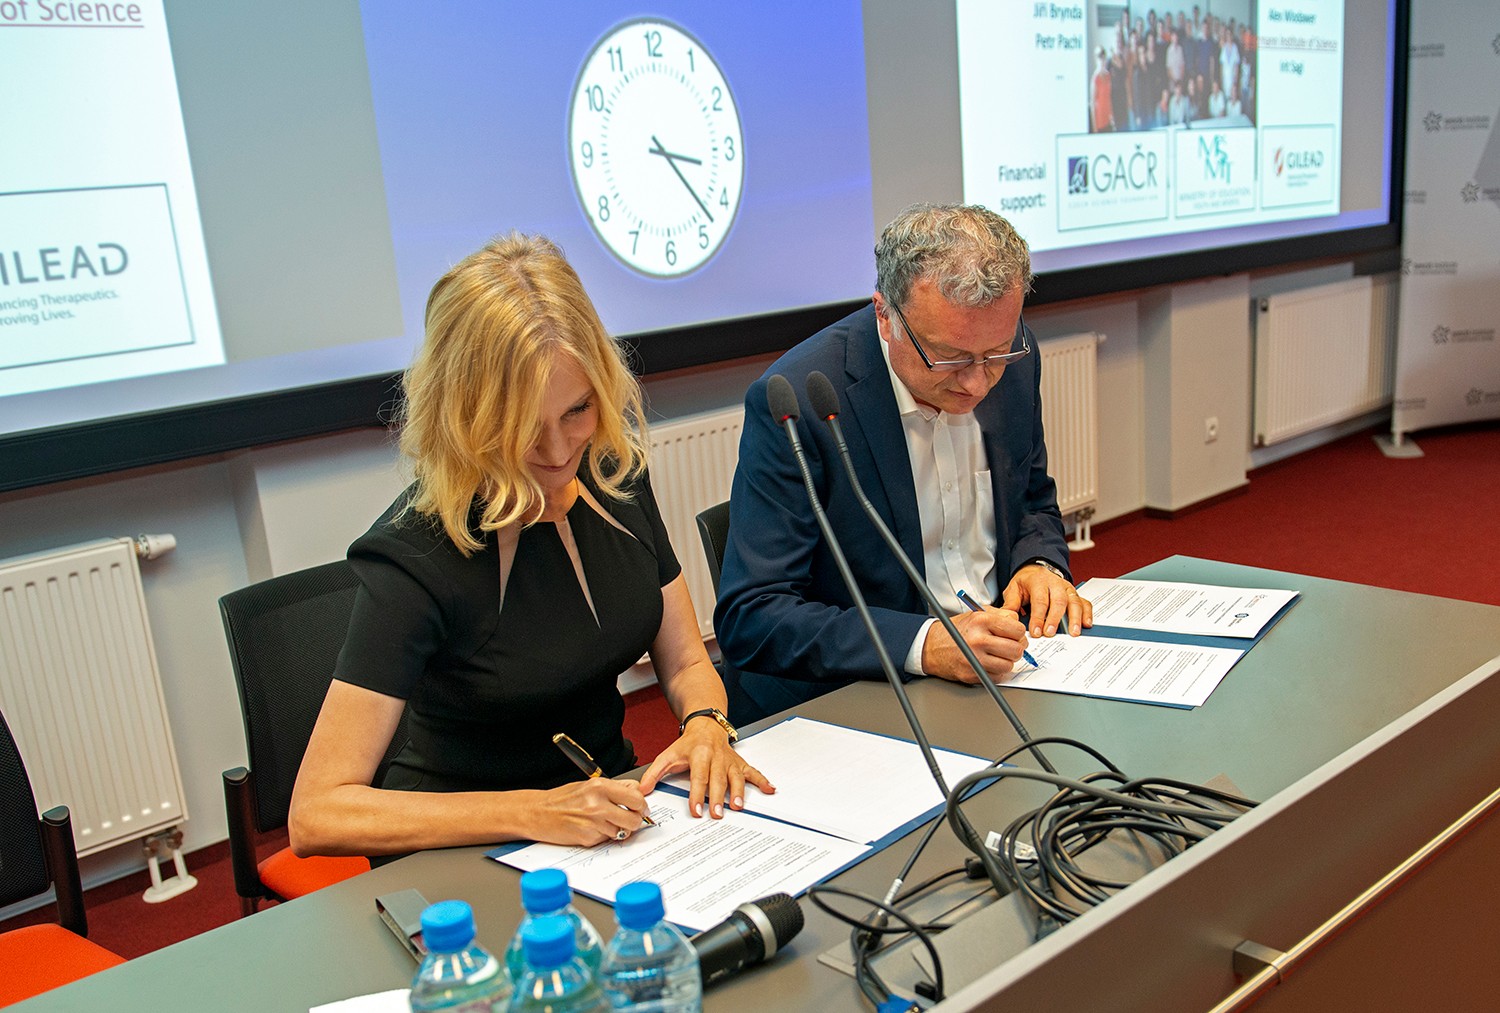 Nencki Institute and IOCB Prague join forces